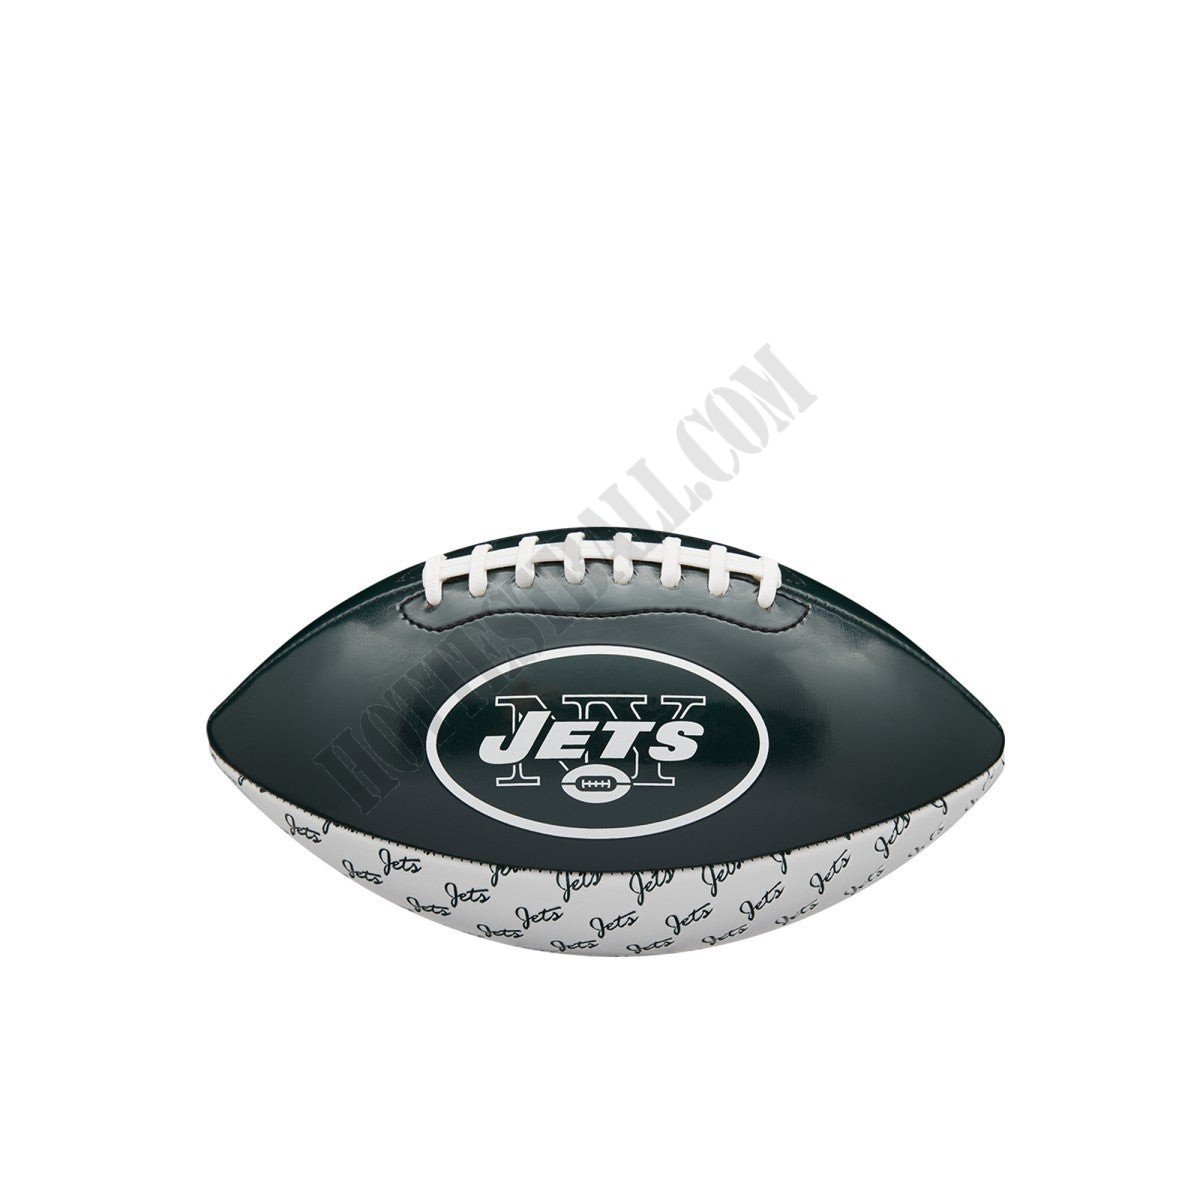 NFL City Pride Football - New York Jets ● Wilson Promotions - NFL City Pride Football - New York Jets ● Wilson Promotions